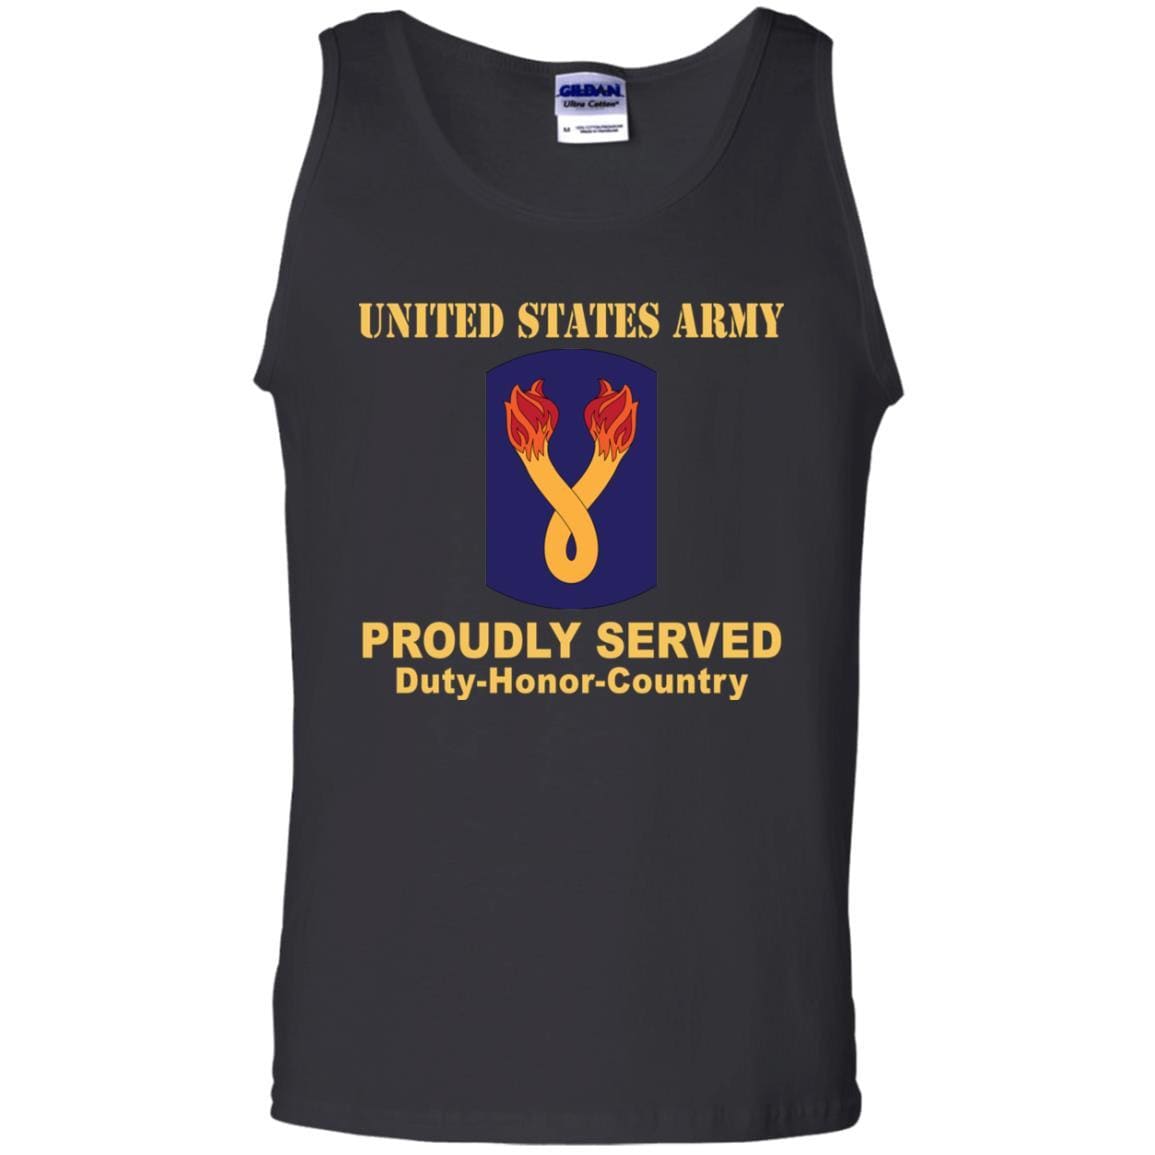 US ARMY 196TH INFANTRY BRIGADE- Proudly Served T-Shirt On Front For Men-TShirt-Army-Veterans Nation